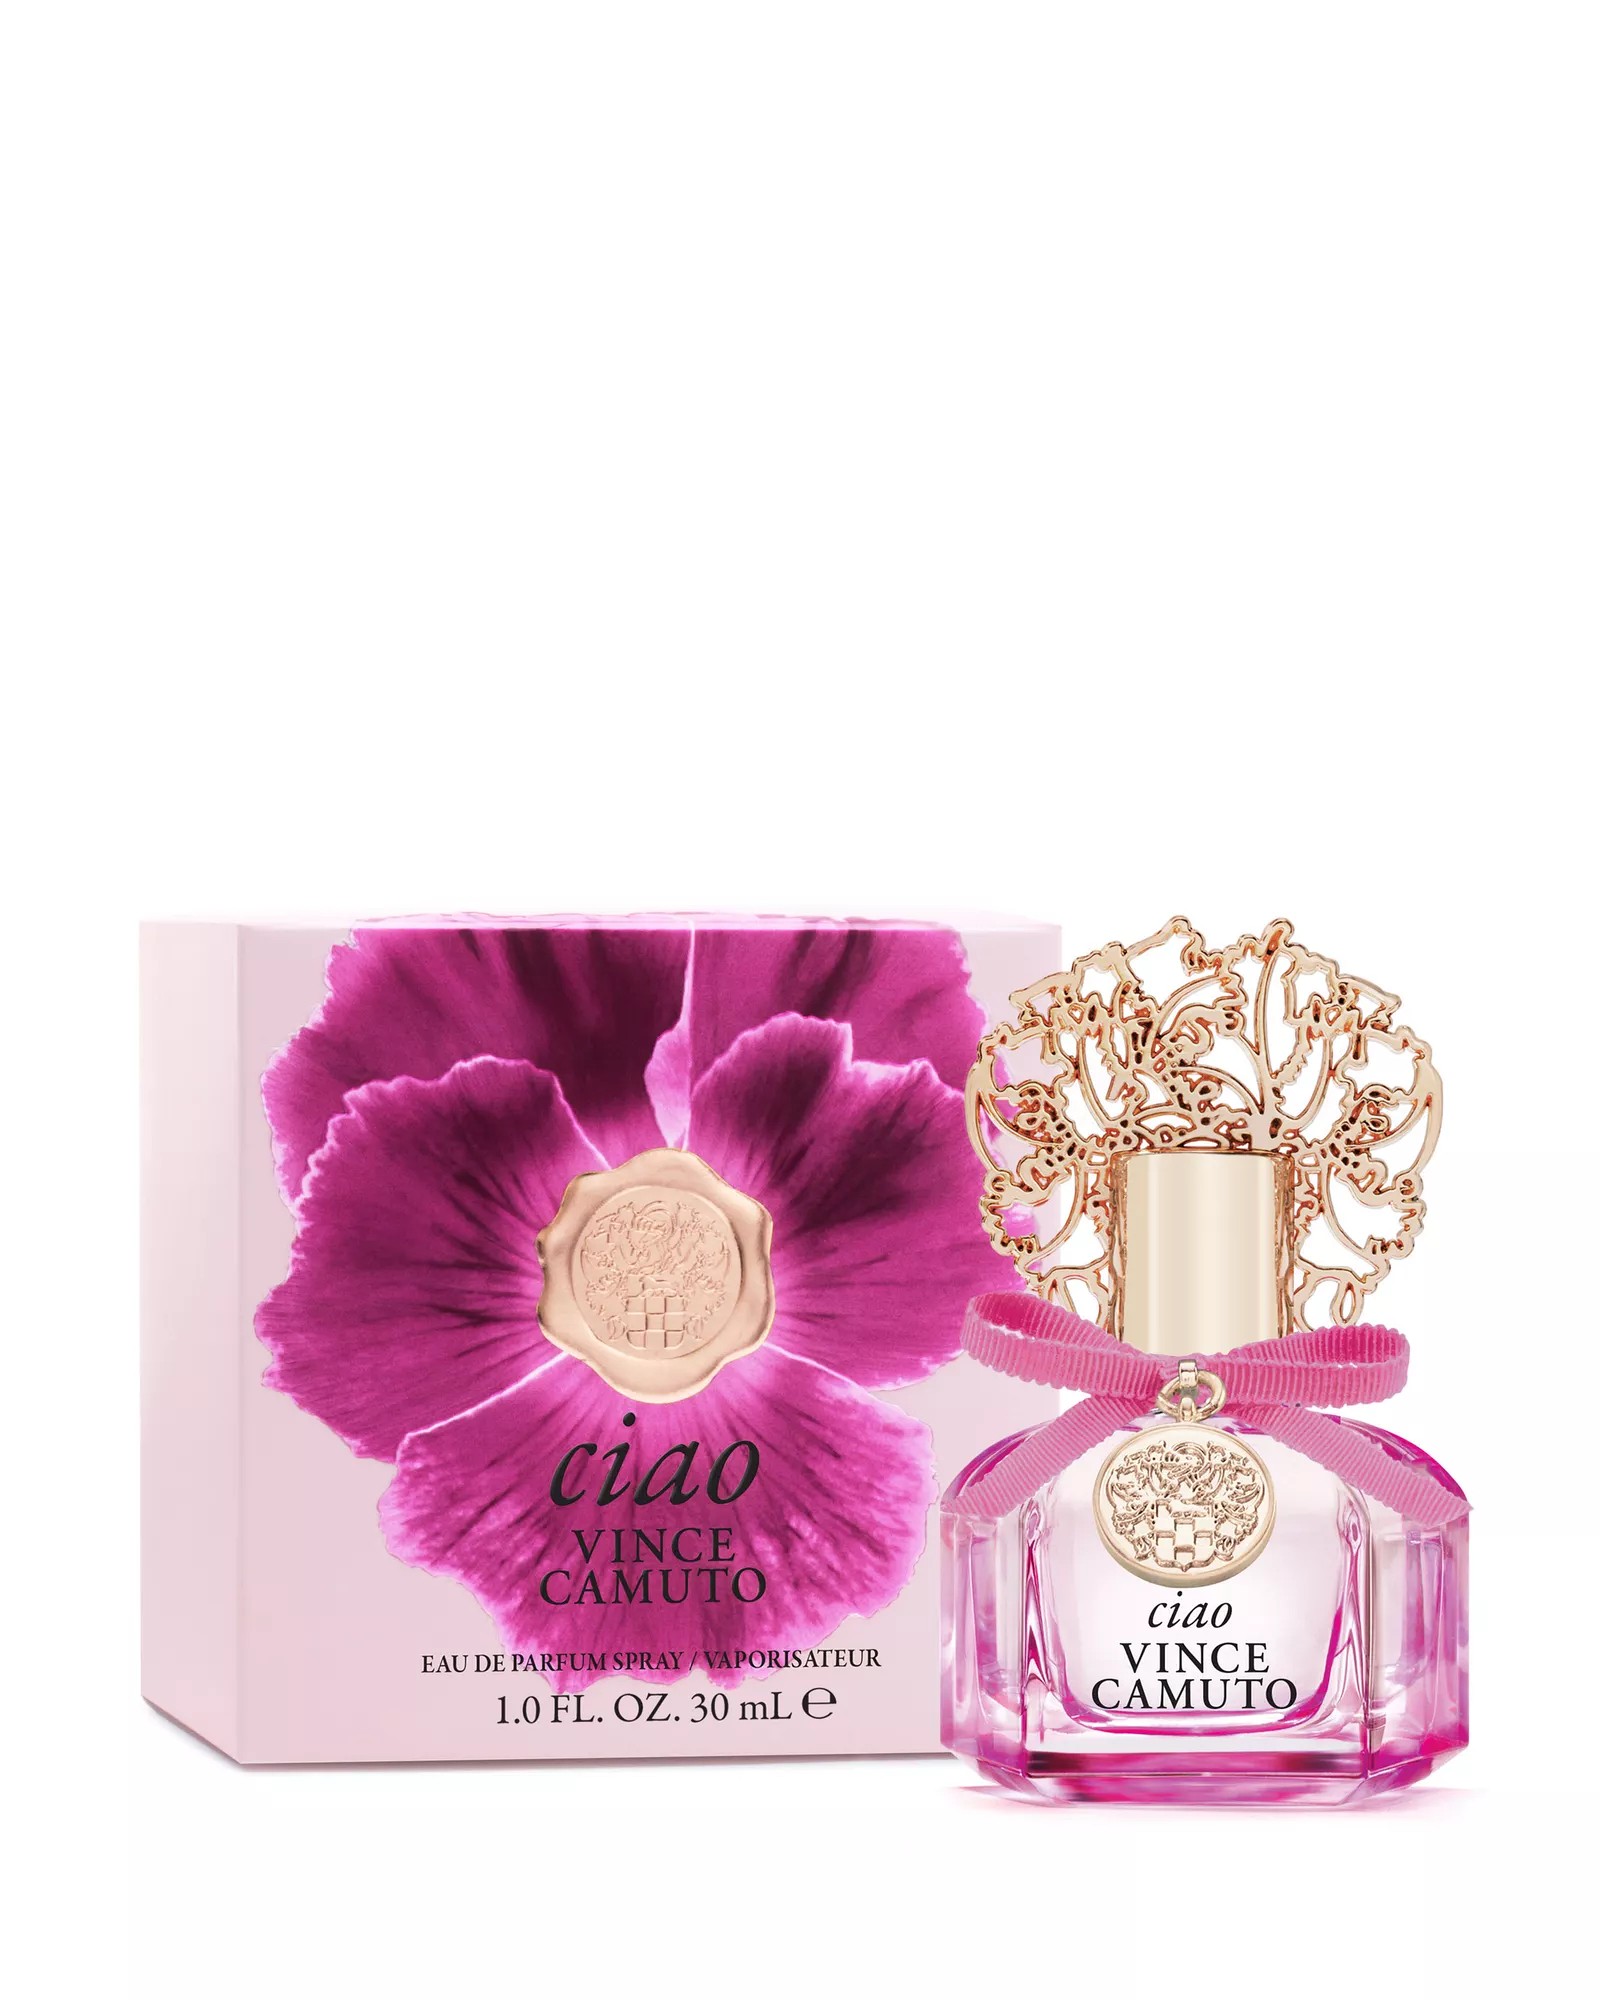 Vince Camuto Ciao for Women EDP – AuraFragrance